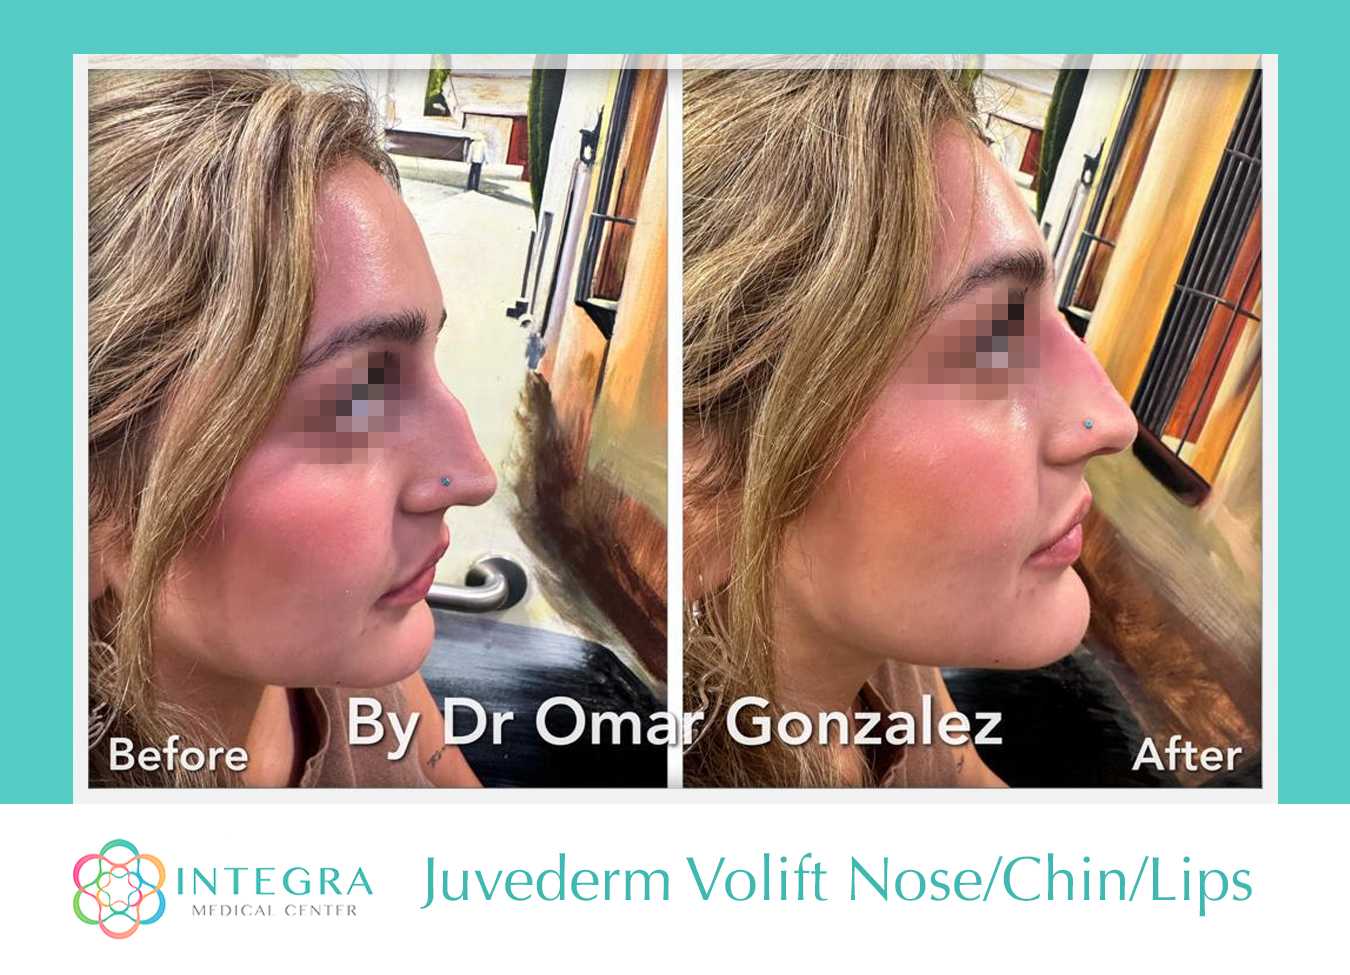 Before After - Juvederm Volift Application on Nose-Chin-Lips By Dr. Omar Gonzalez at Integra Medical Center in Nuevo Progreso, Mexico